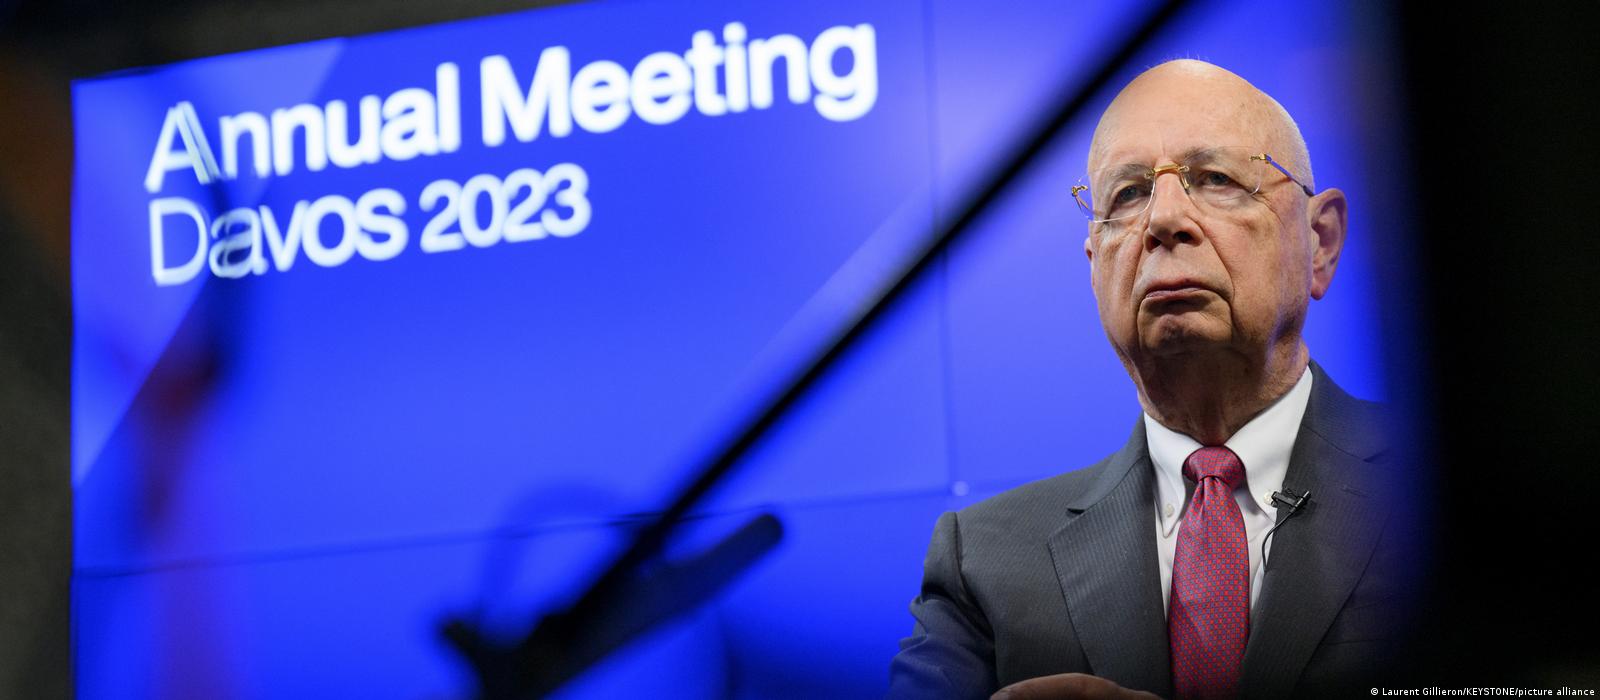 The list of delegates to the 2020 World Economic Forum in Davos